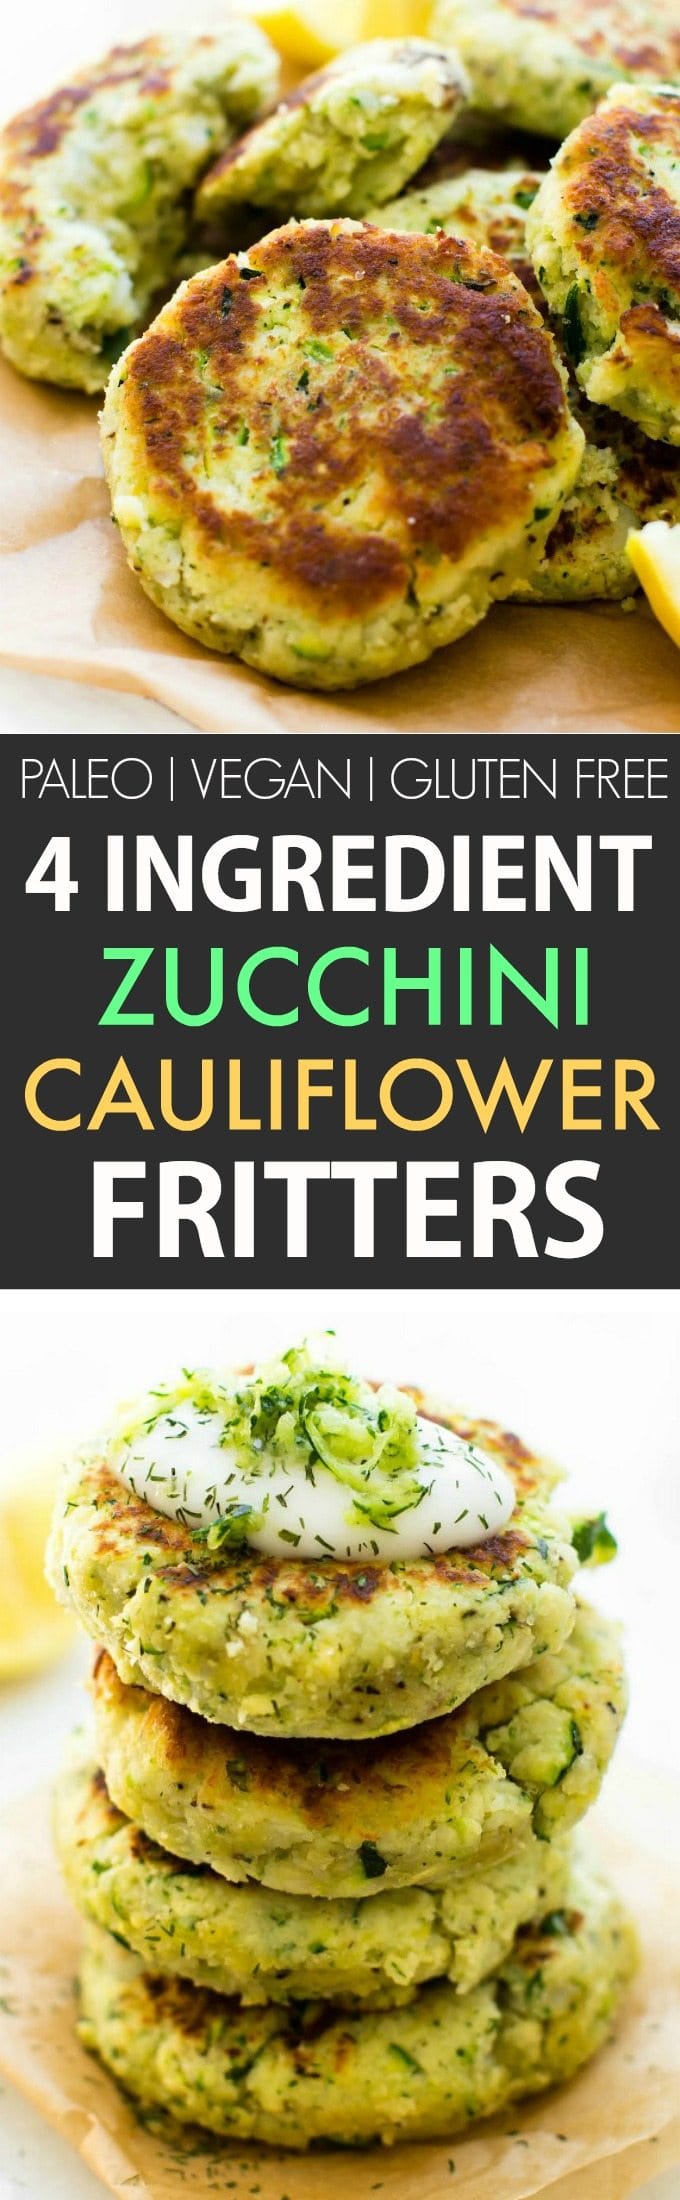 4 Ingredient Zucchini Cauliflower Fritters (V, GF, P, DF)- Crispy, easy and oil-free, these veggie packed cauliflower rice fritters need just four ingredients and 5 minutes to whip up! A kid-friendly meat-free/vegetarian meal! {vegan, gluten free, paleo recipe}- thebigmansworld.com